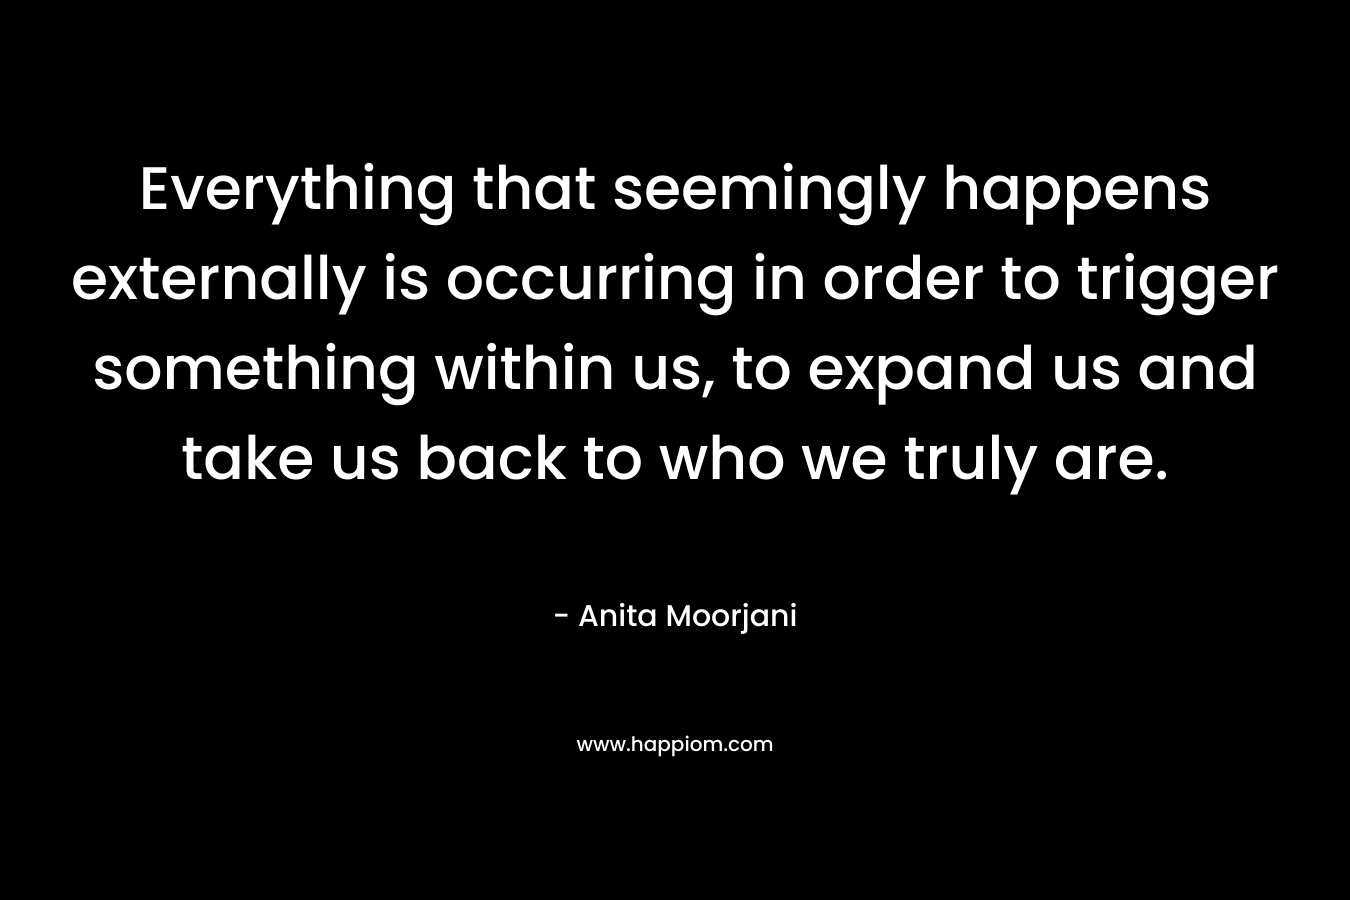 Everything that seemingly happens externally is occurring in order to trigger something within us, to expand us and take us back to who we truly are. – Anita Moorjani